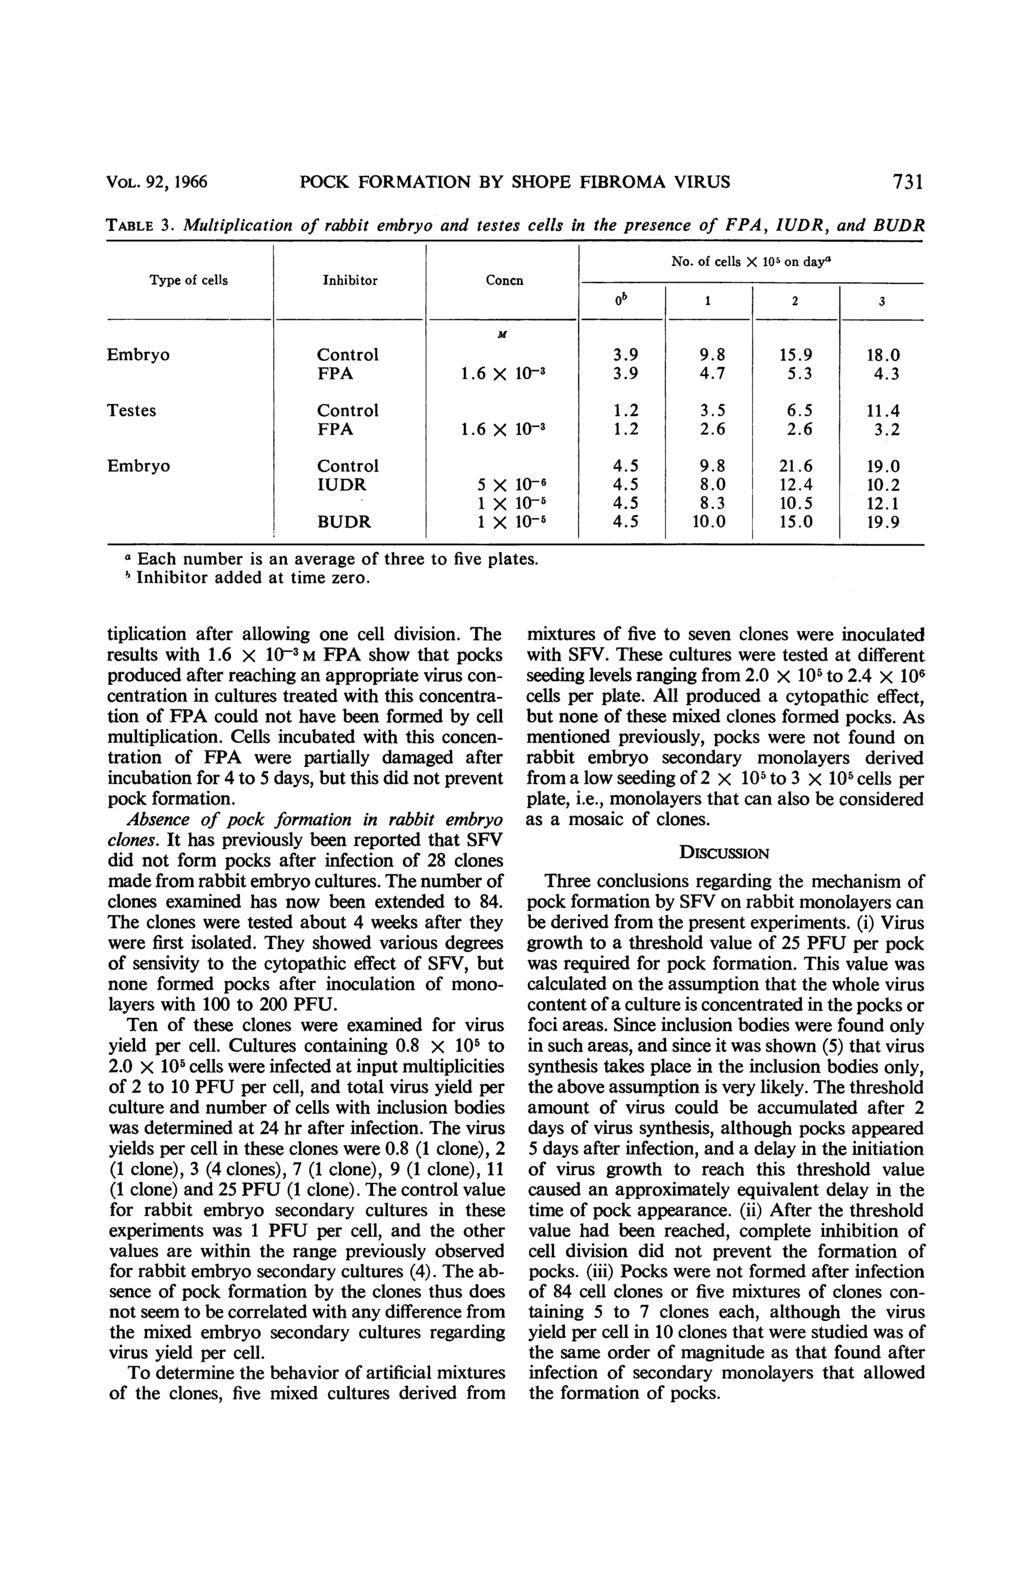 VOL. 92, 1966 POCK FORMATION BY SHOPE FIBROMA VIRUS 731 TABLE 3. Multiplication of rabbit embryo and testes cells in the presence of FPA, IUDR, and BUDR Type of cells Inhibitor Concn No.